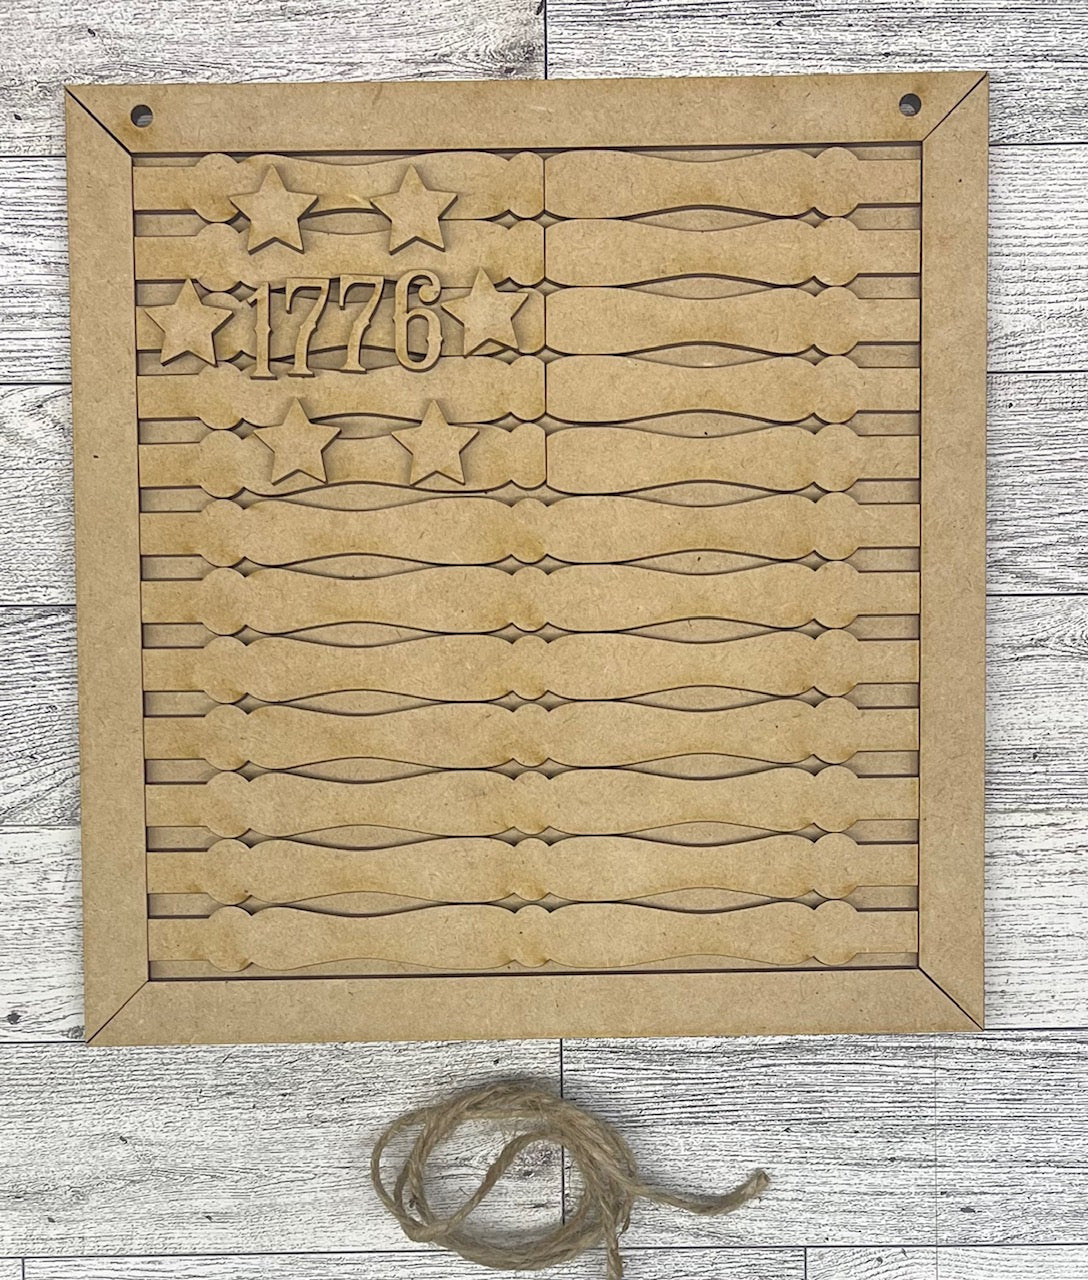 Spindle 1776 Flag Sign Cutouts, unpainted wooden cutouts - ready for you to paint